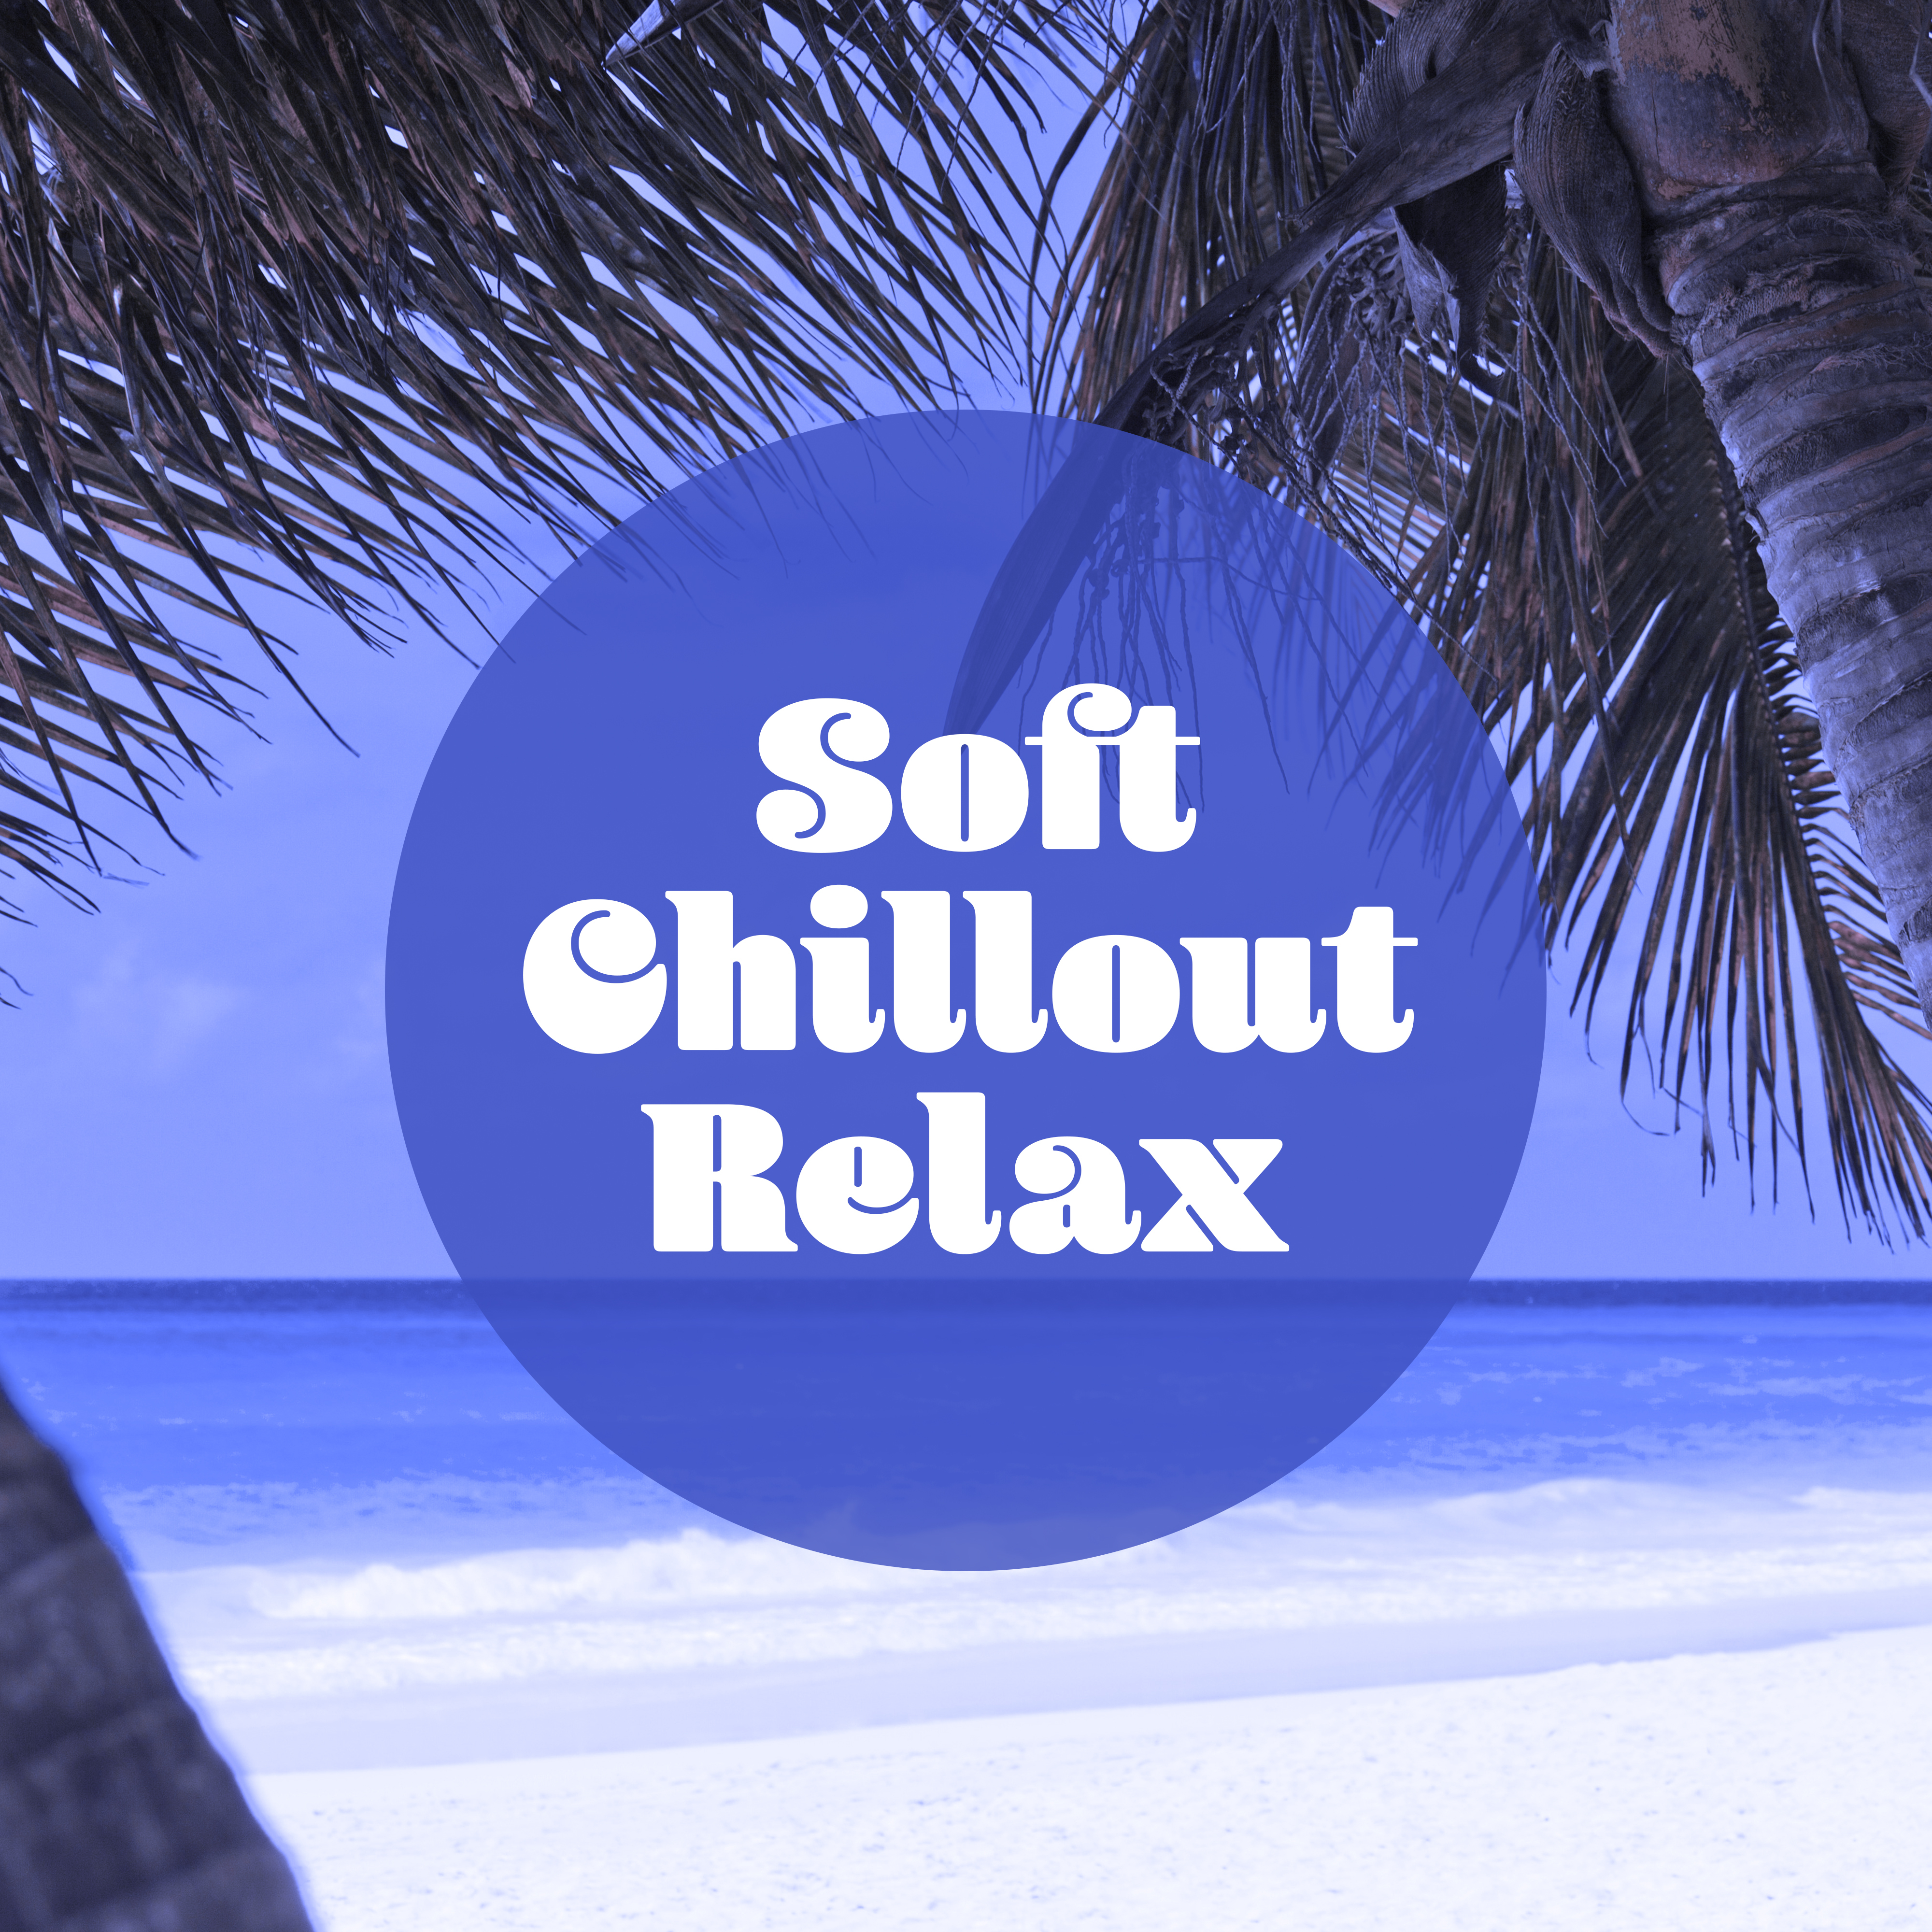 Soft Chillout Relax – Electronic Music, Ambient Sounds, Music for Party, Beach Music